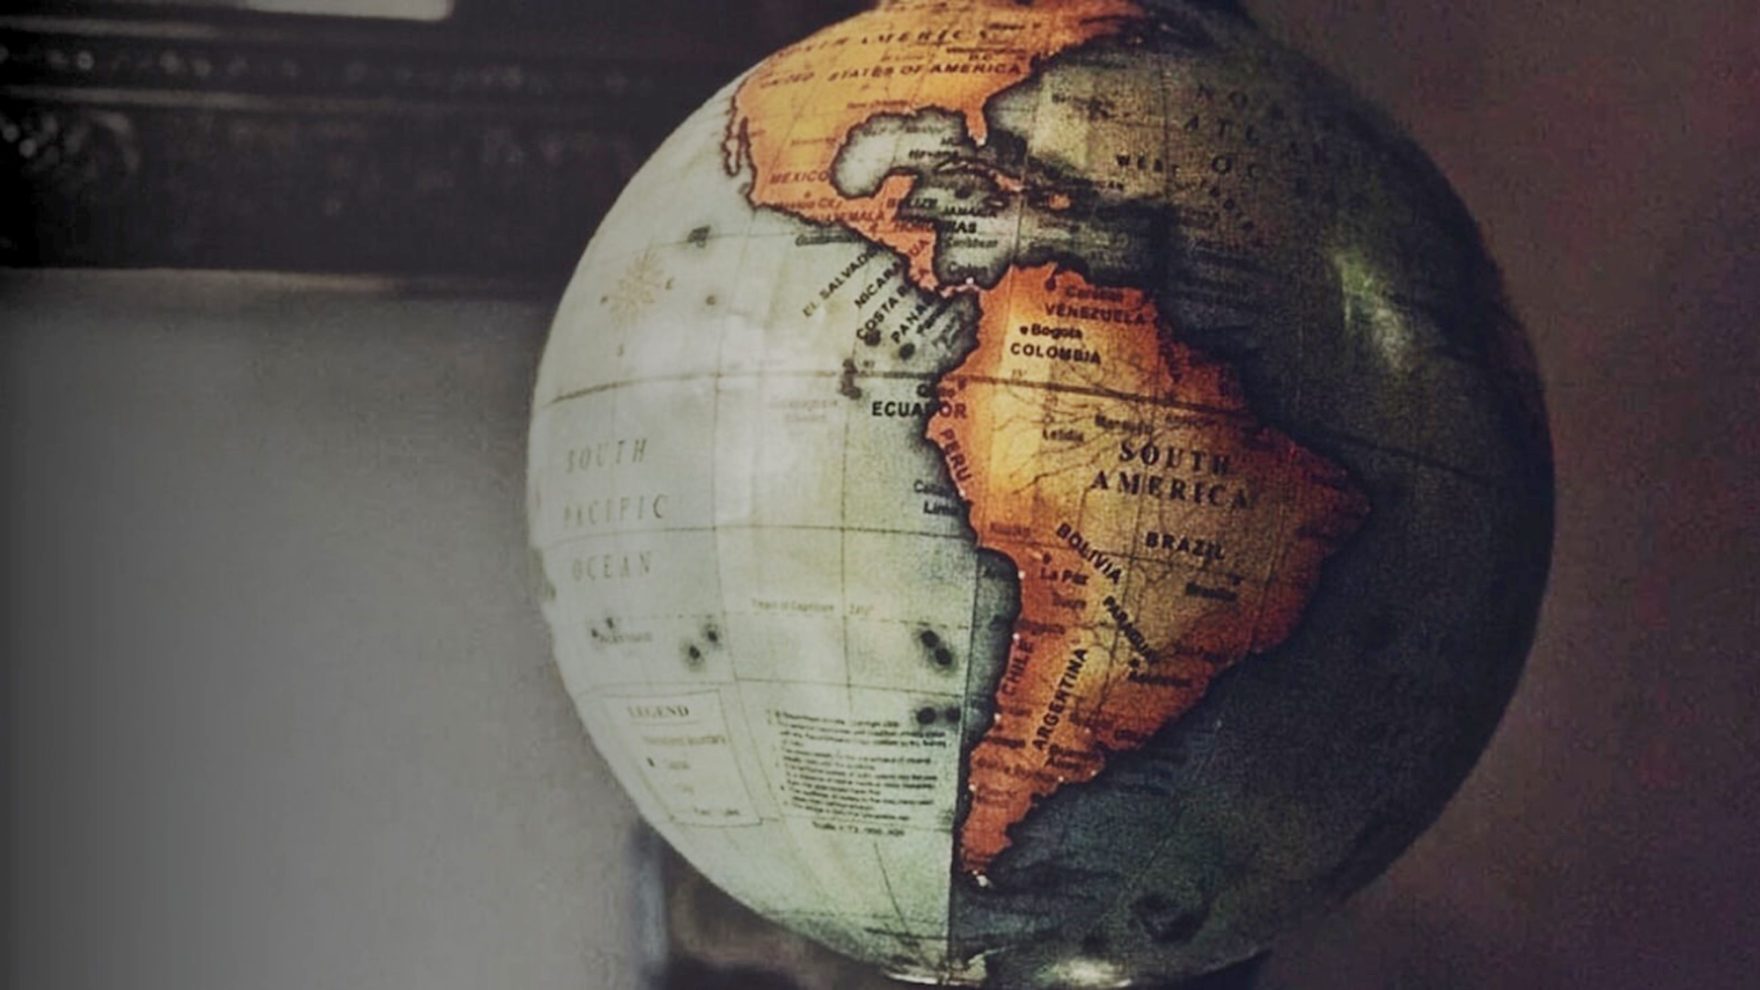 A closeup view of a globe displaying South America in the office of a Regent University professor in Virginia Beach.